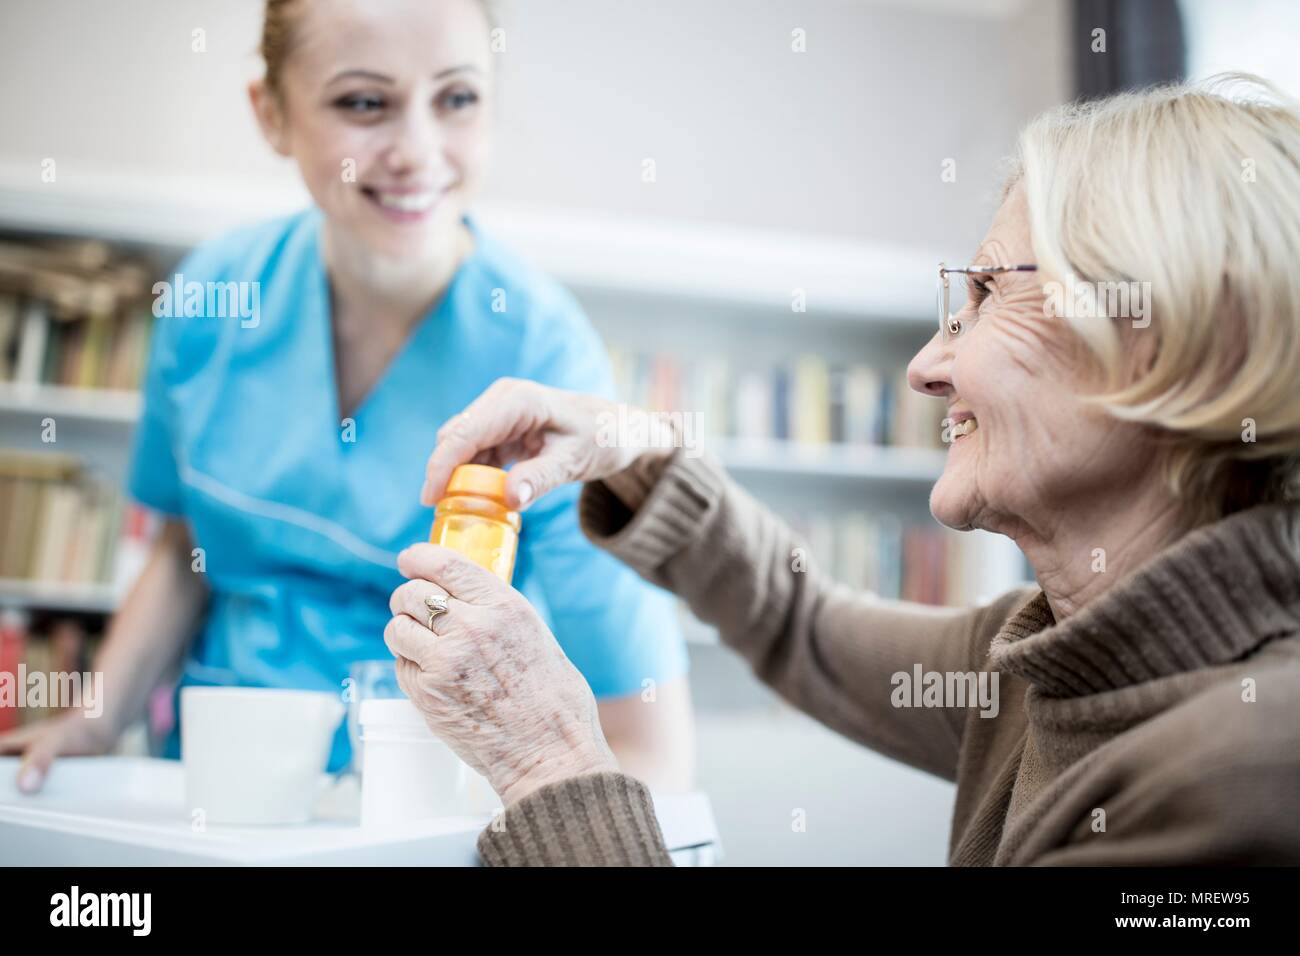 Care worker and senior woman opening medicine bottle. Stock Photo